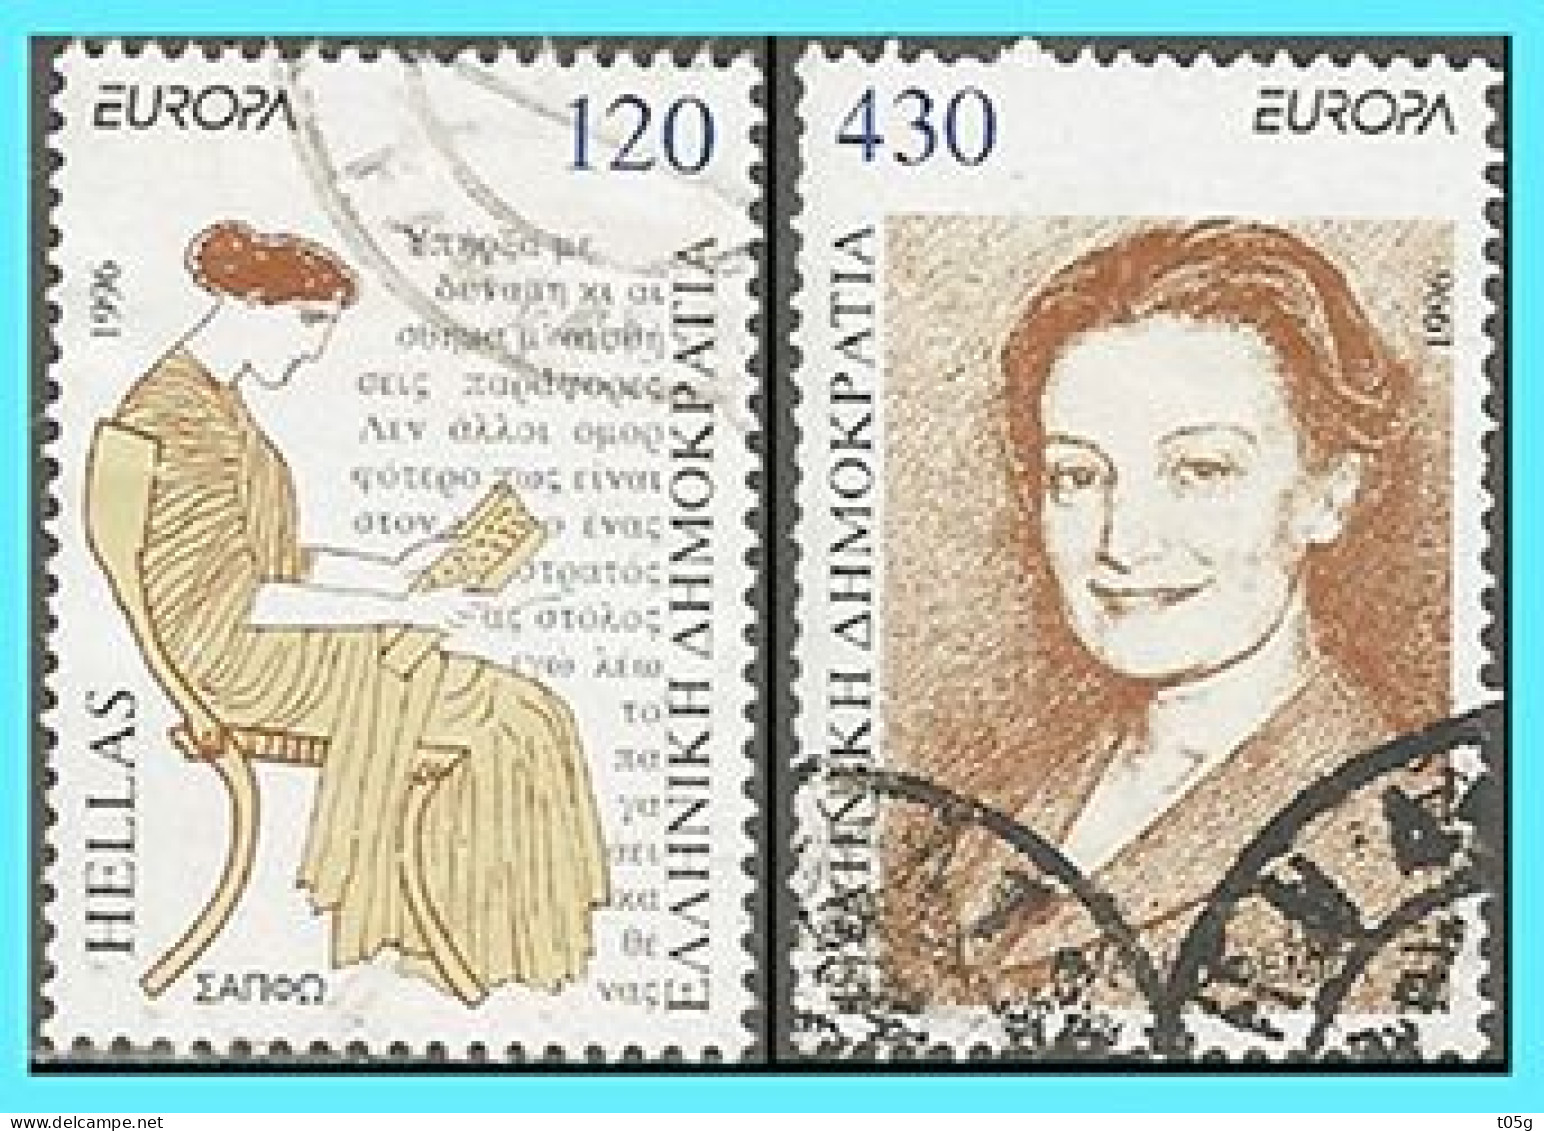 GREECE- GRECE - HELLAS - EUROPA CEPT 1996:  Complet. Set Used - Used Stamps